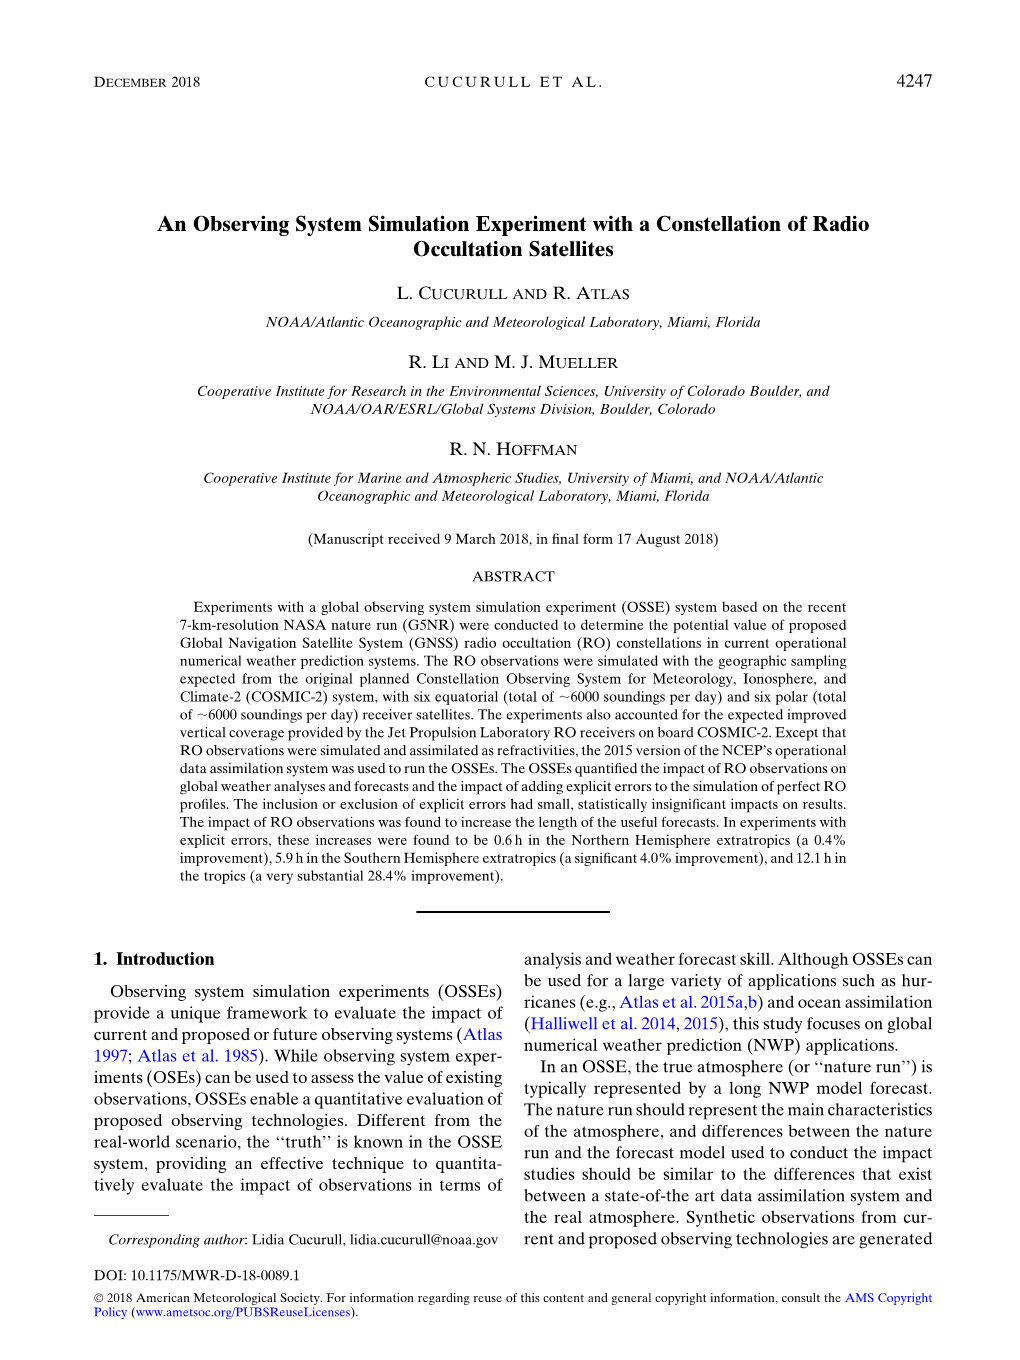 An Observing System Simulation Experiment with a Constellation of Radio Occultation Satellites